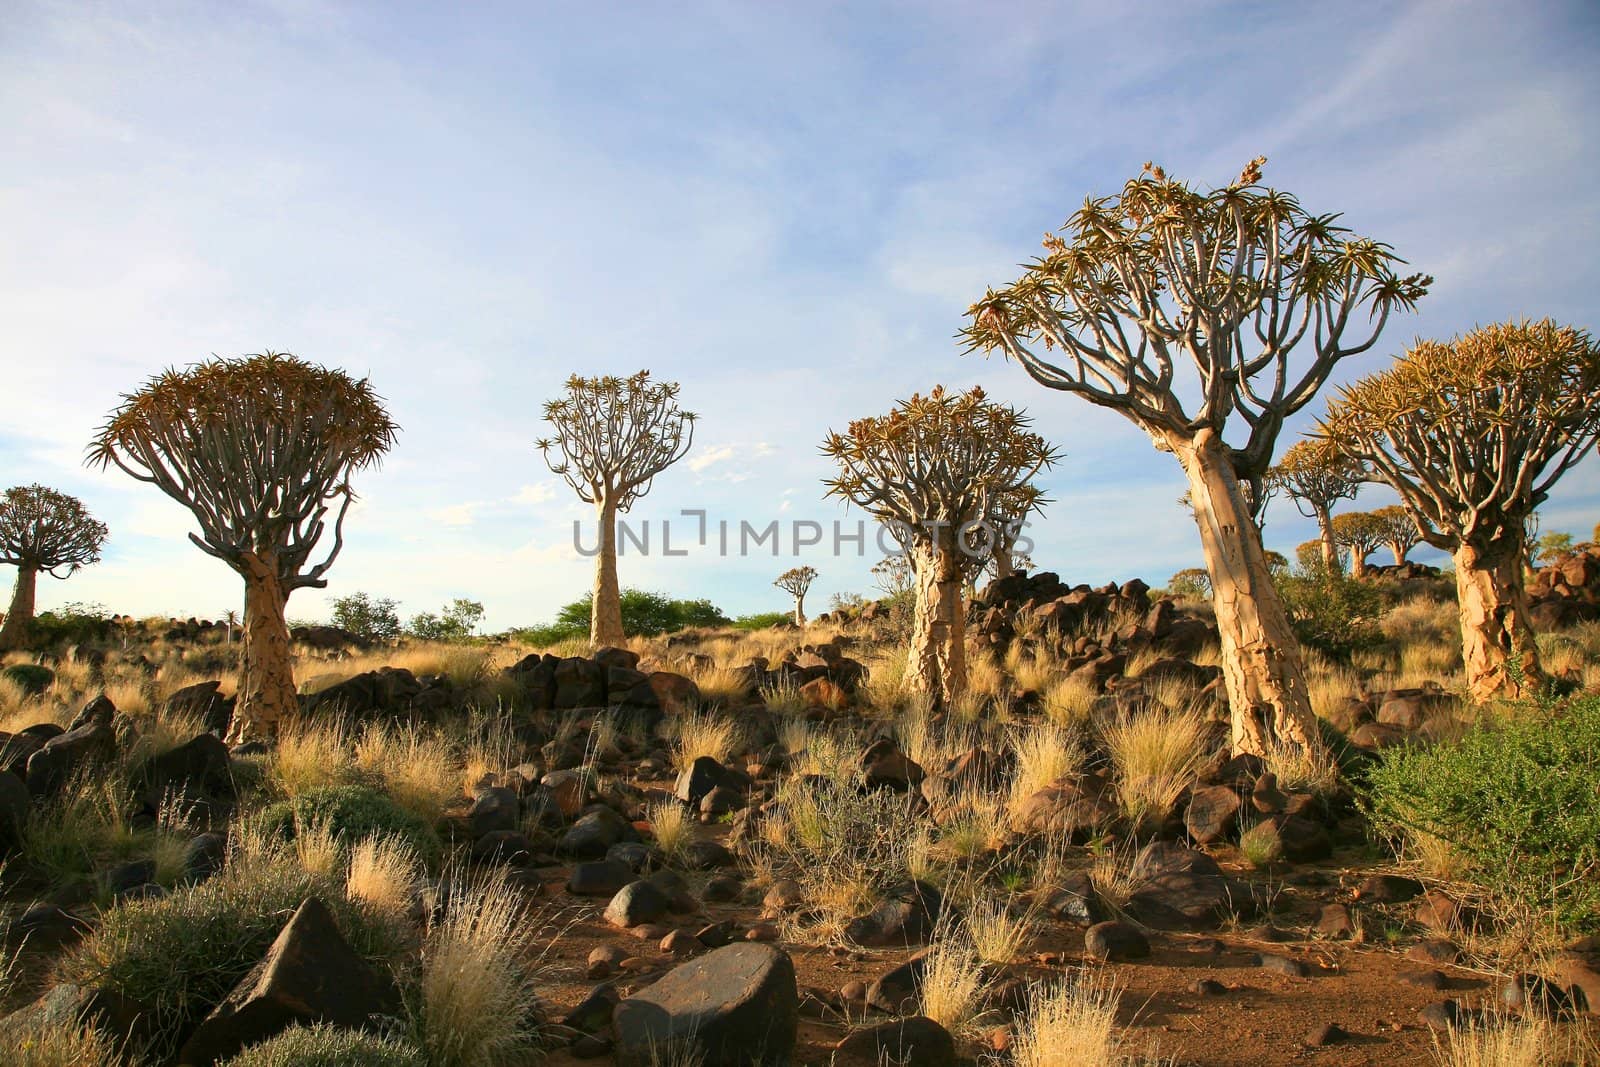 Desert landscape with granite rocks and a quiver tree (Aloe dichotoma), Namibia, southern Africa